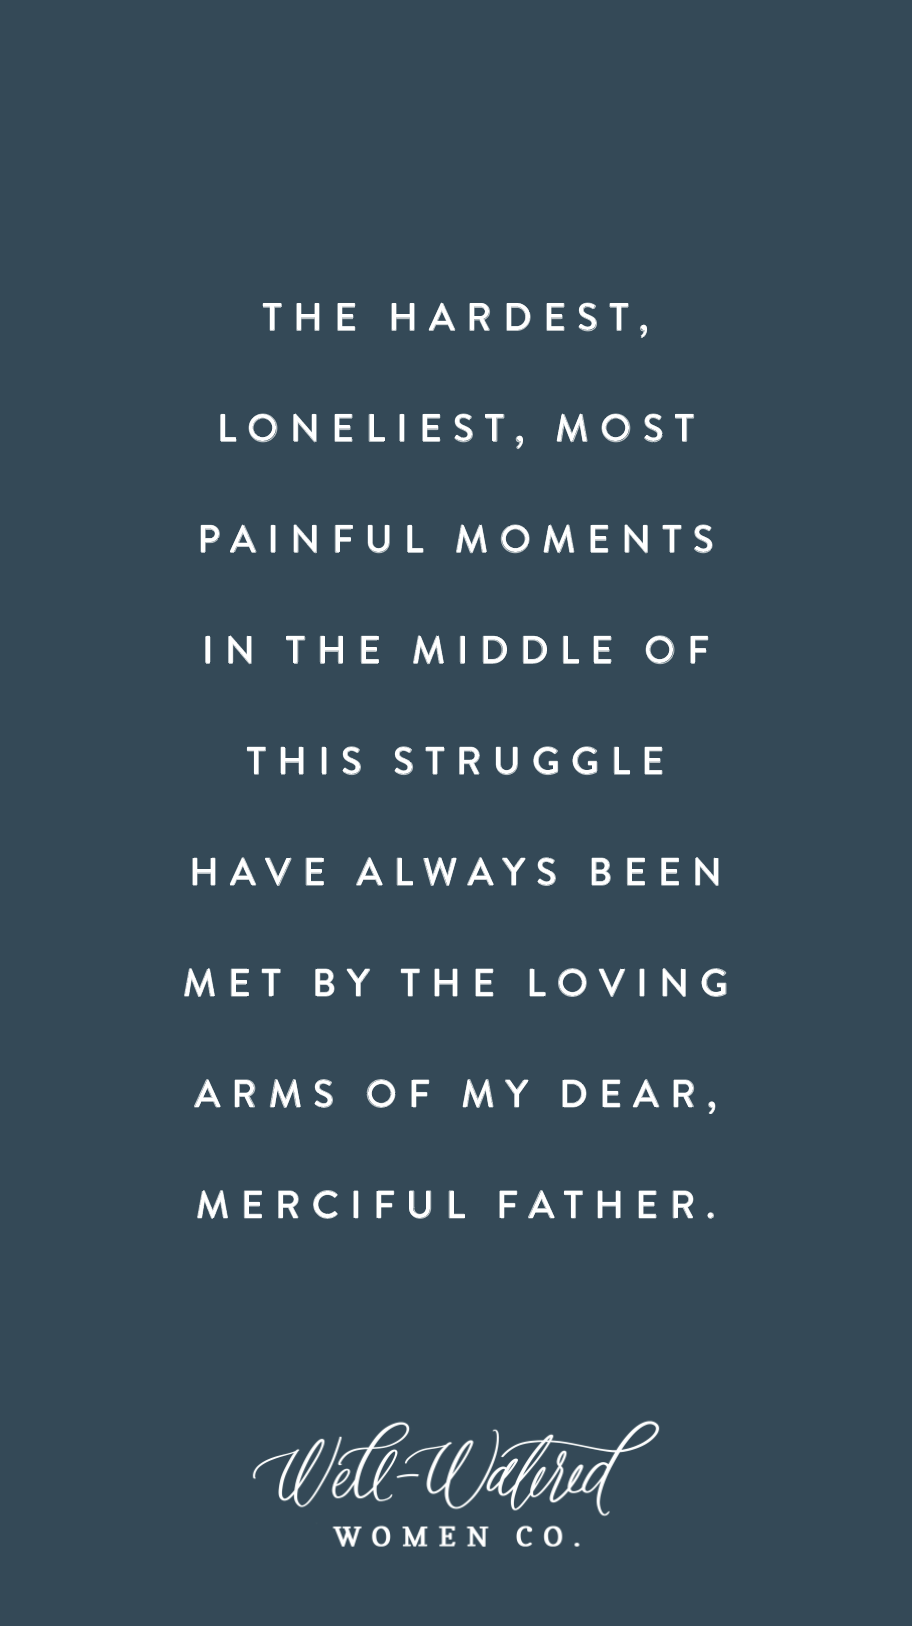 Well-Watered Women Blog-The Hardest, Loneliest, Most Painful Moments in the Middle of This Struggle Have Always Been Met by the Loving Arms of my Dear, Merciful Father